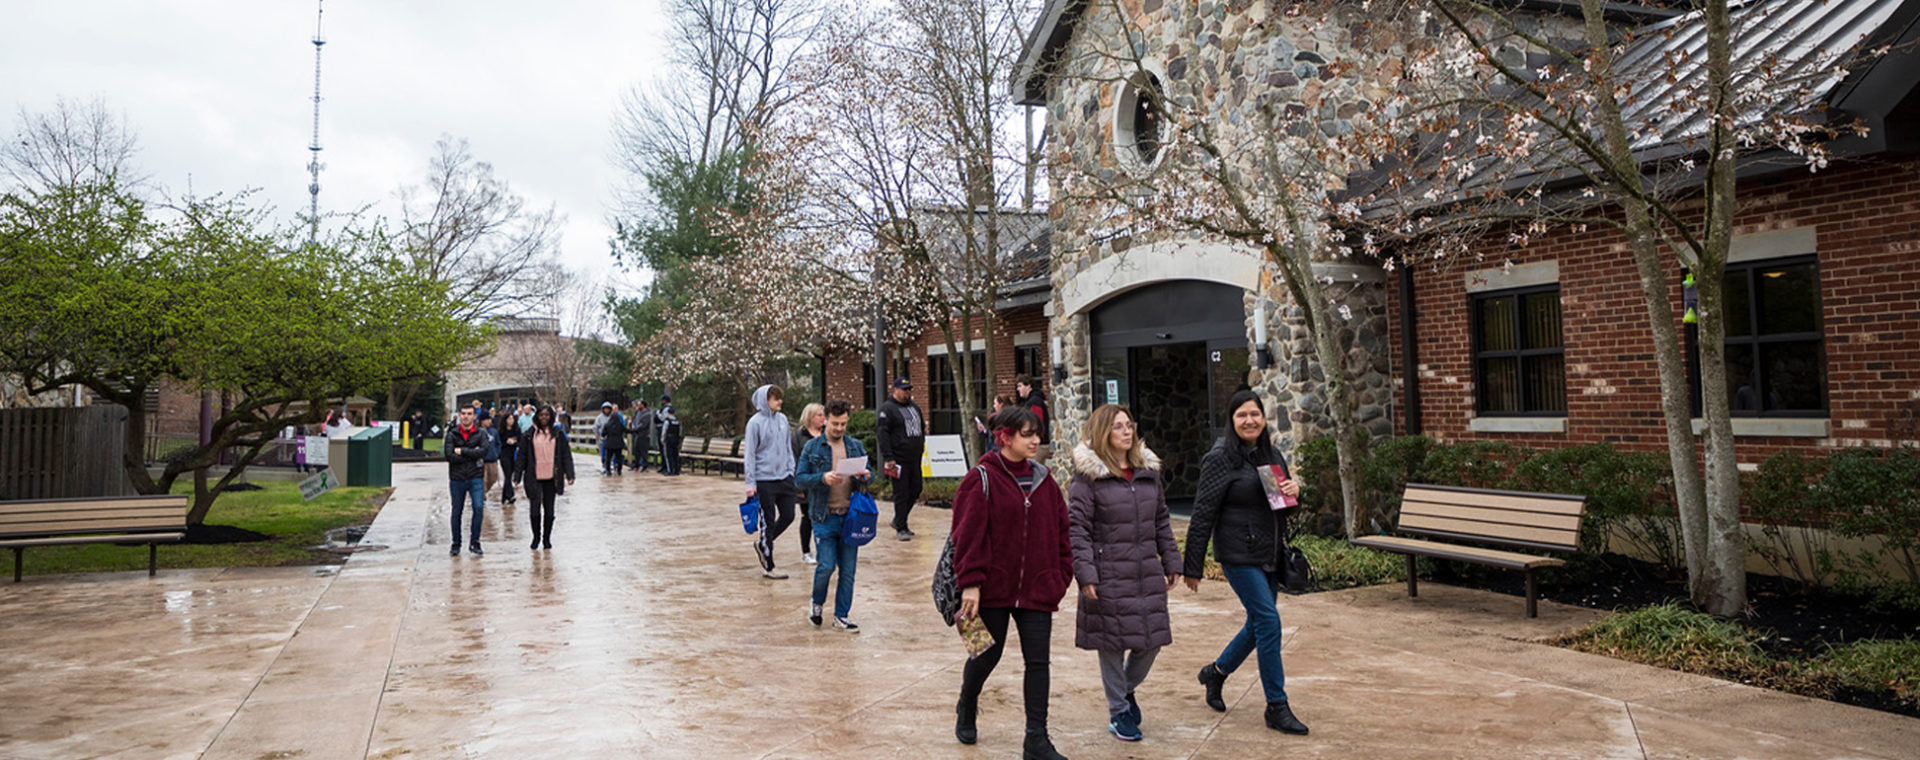 students walking down a path and in front of the student center on campus